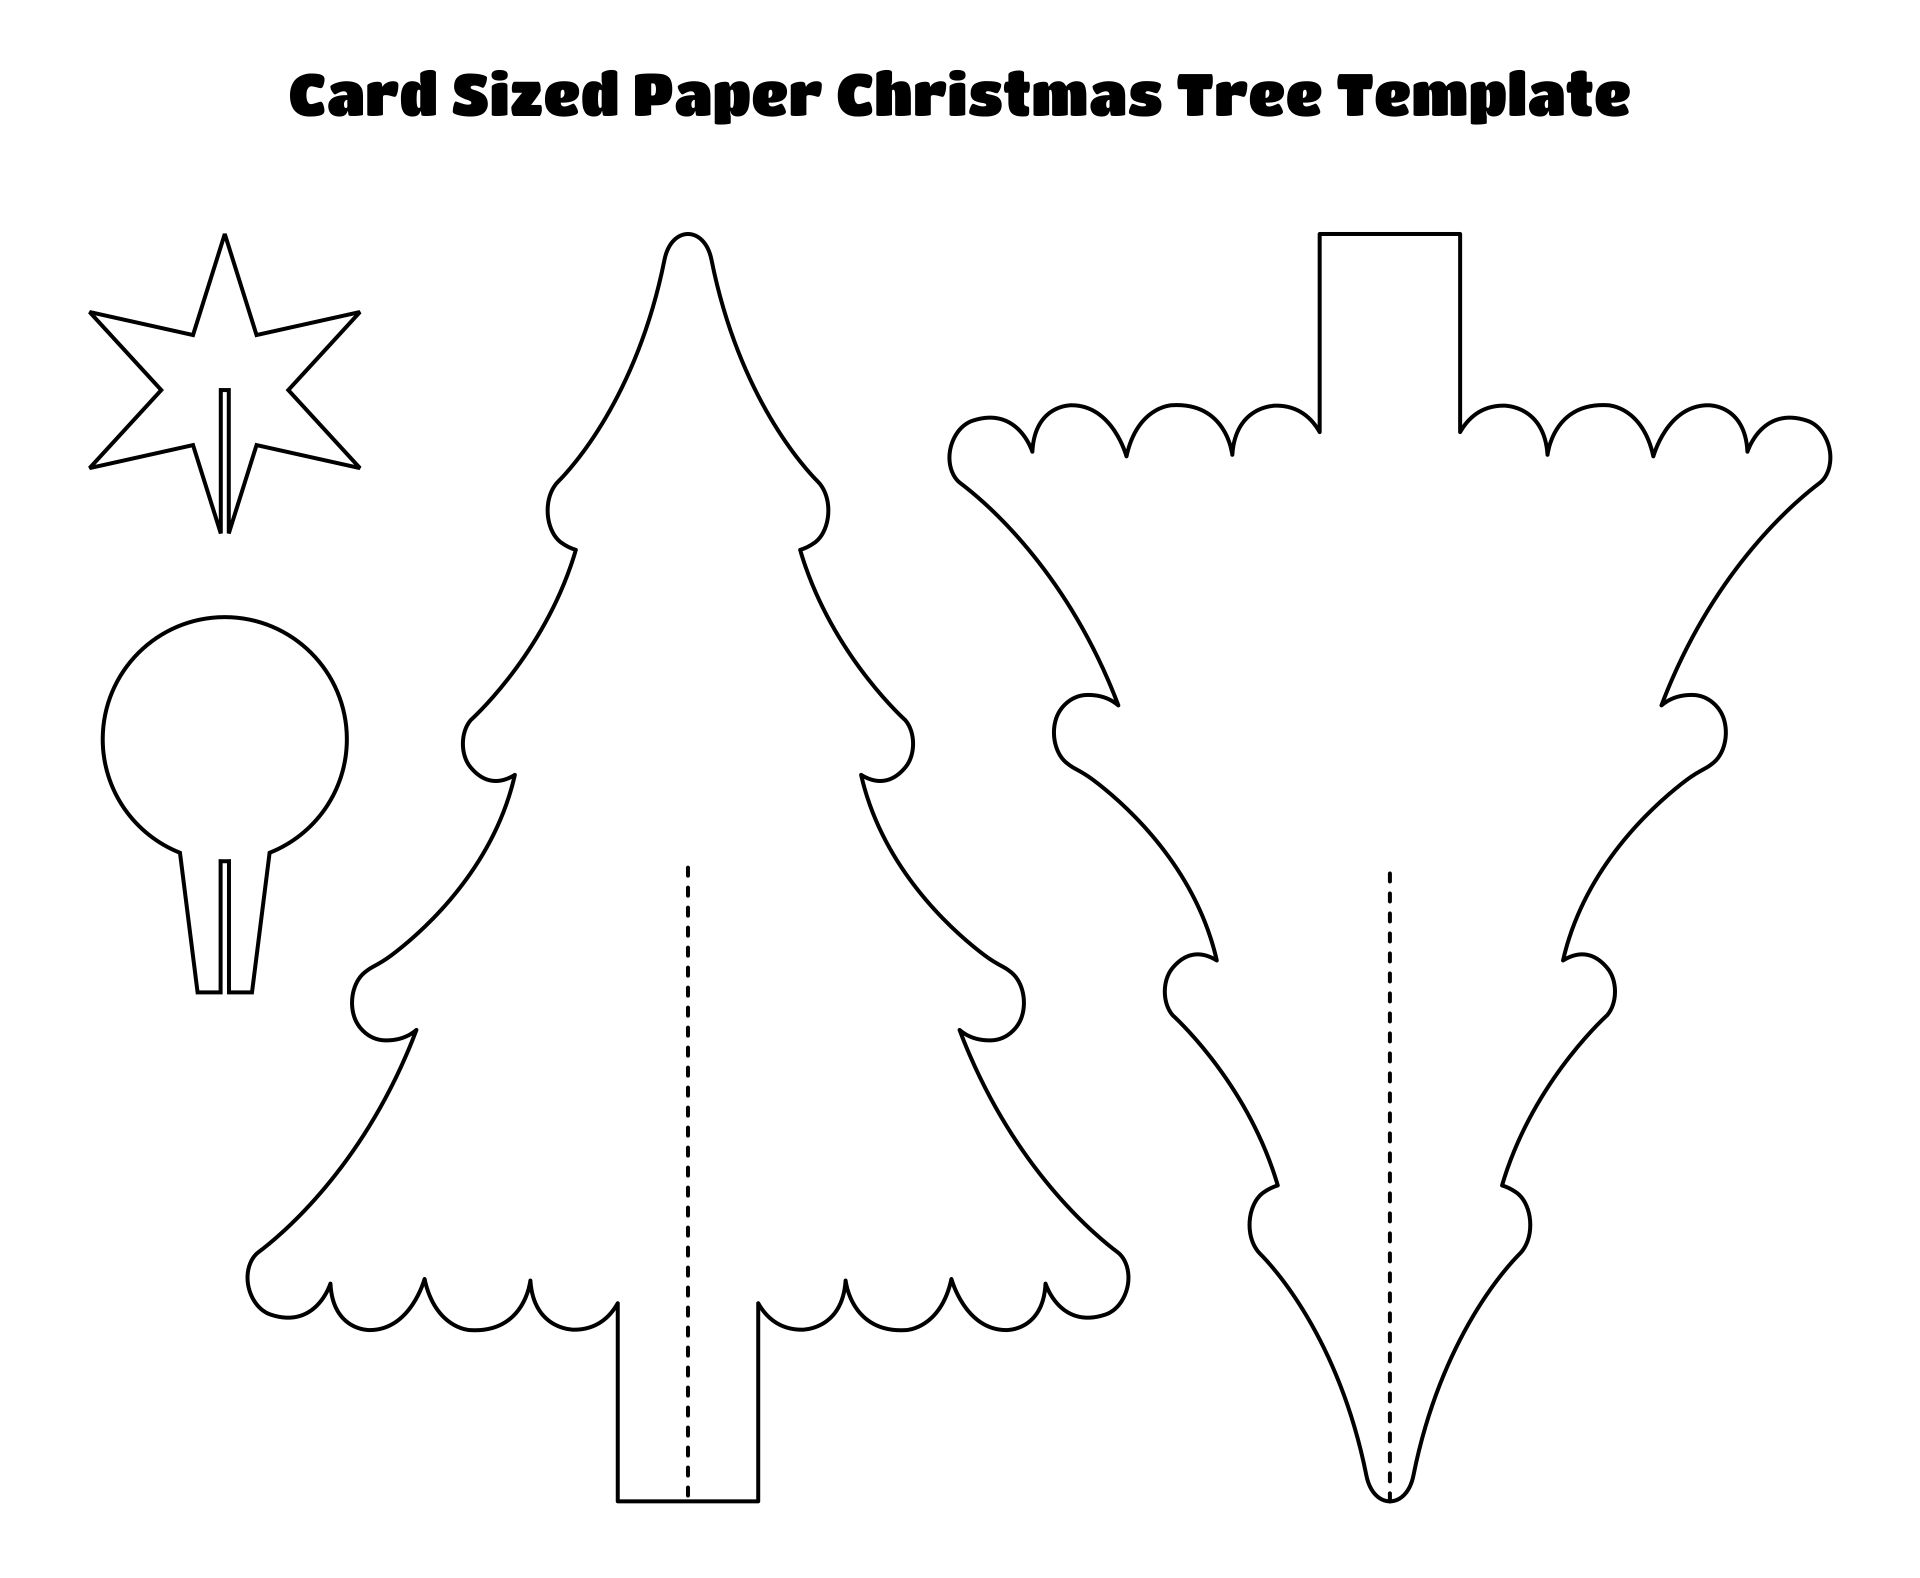 Printable Card Sized Paper Christmas Tree Template